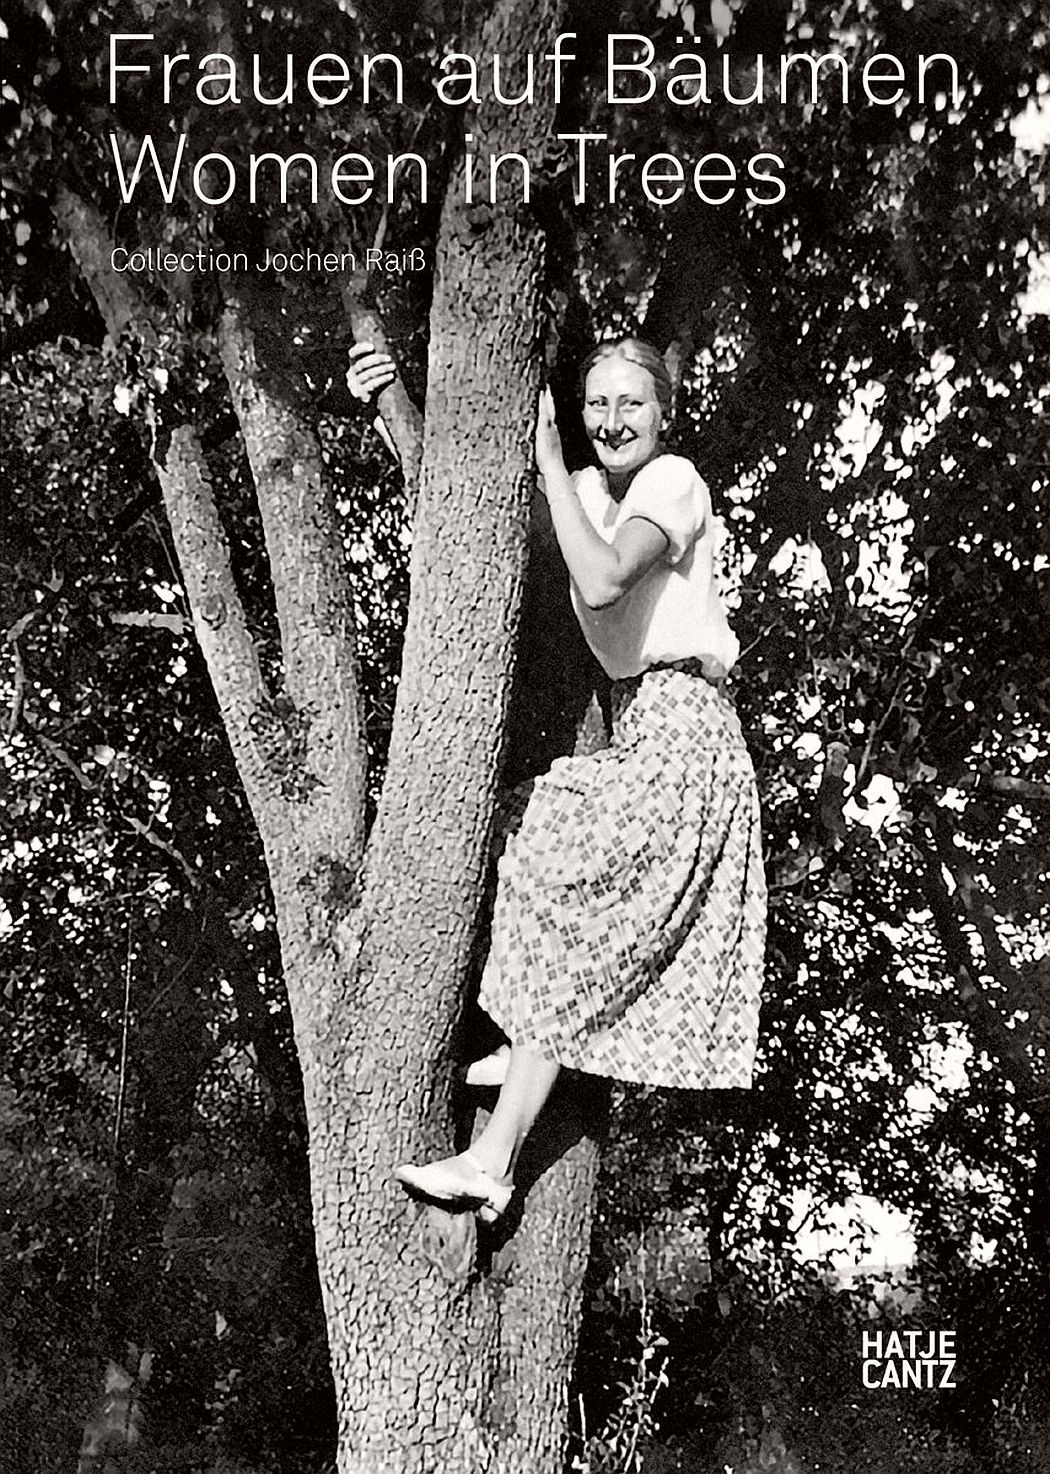 women-in-trees-hatje-cantz-00-book-cover